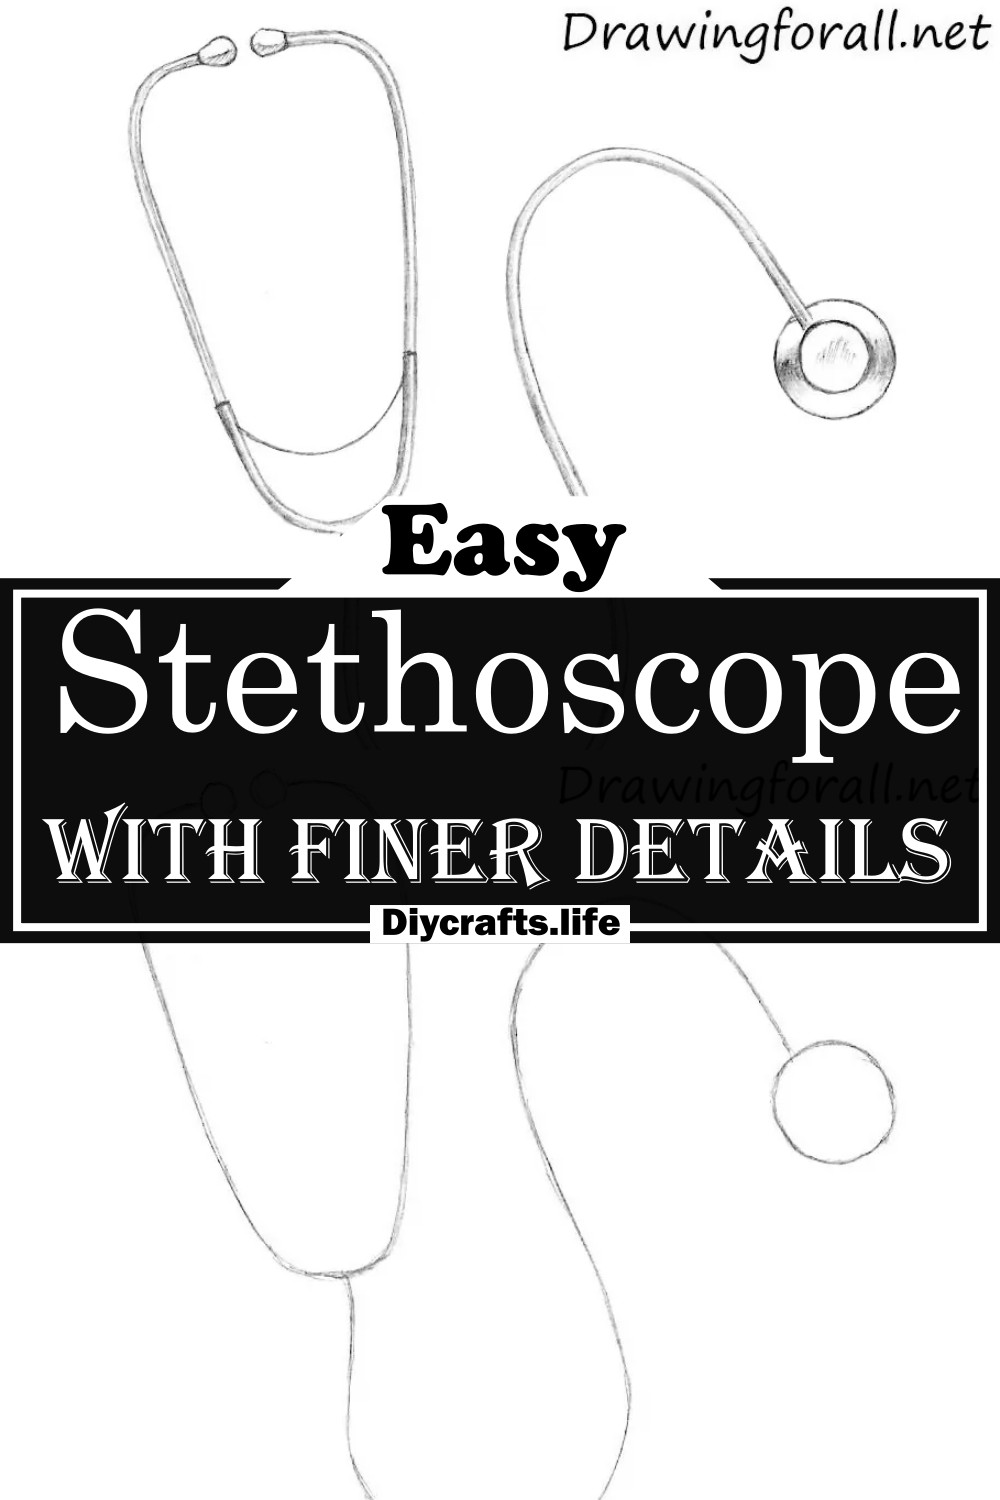 Stethoscope with Finer Details